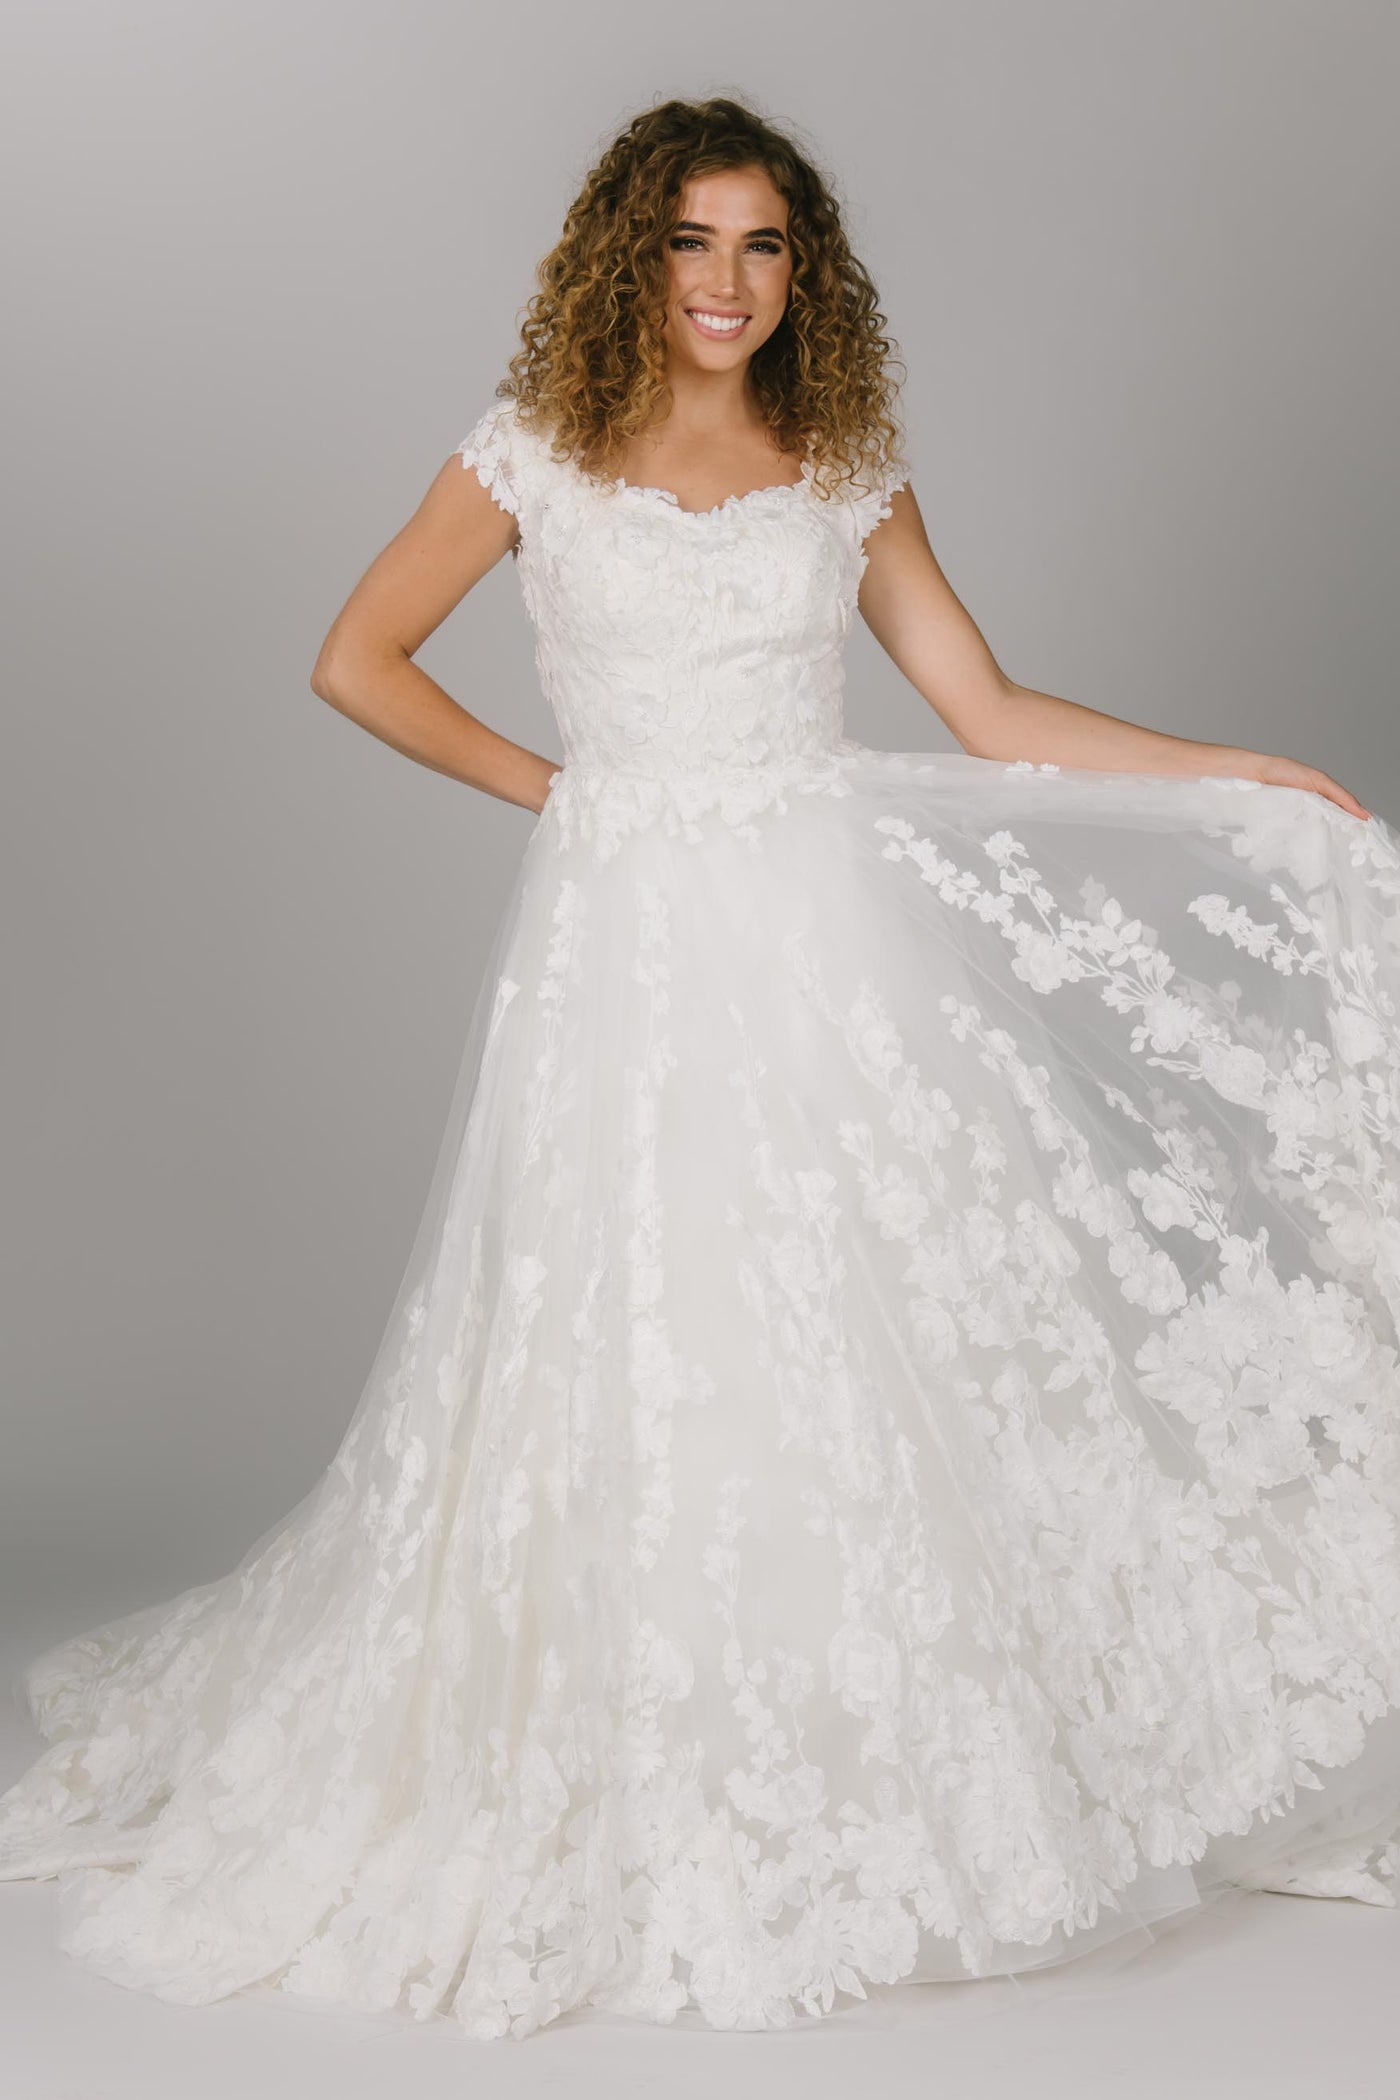 Overskirt view of modest wedding dress that is fitted. It has a sweetheart neckline and cap sleeves. The 3D sheet lace covers the dress. This is the ultimate fitted modest wedding dress.